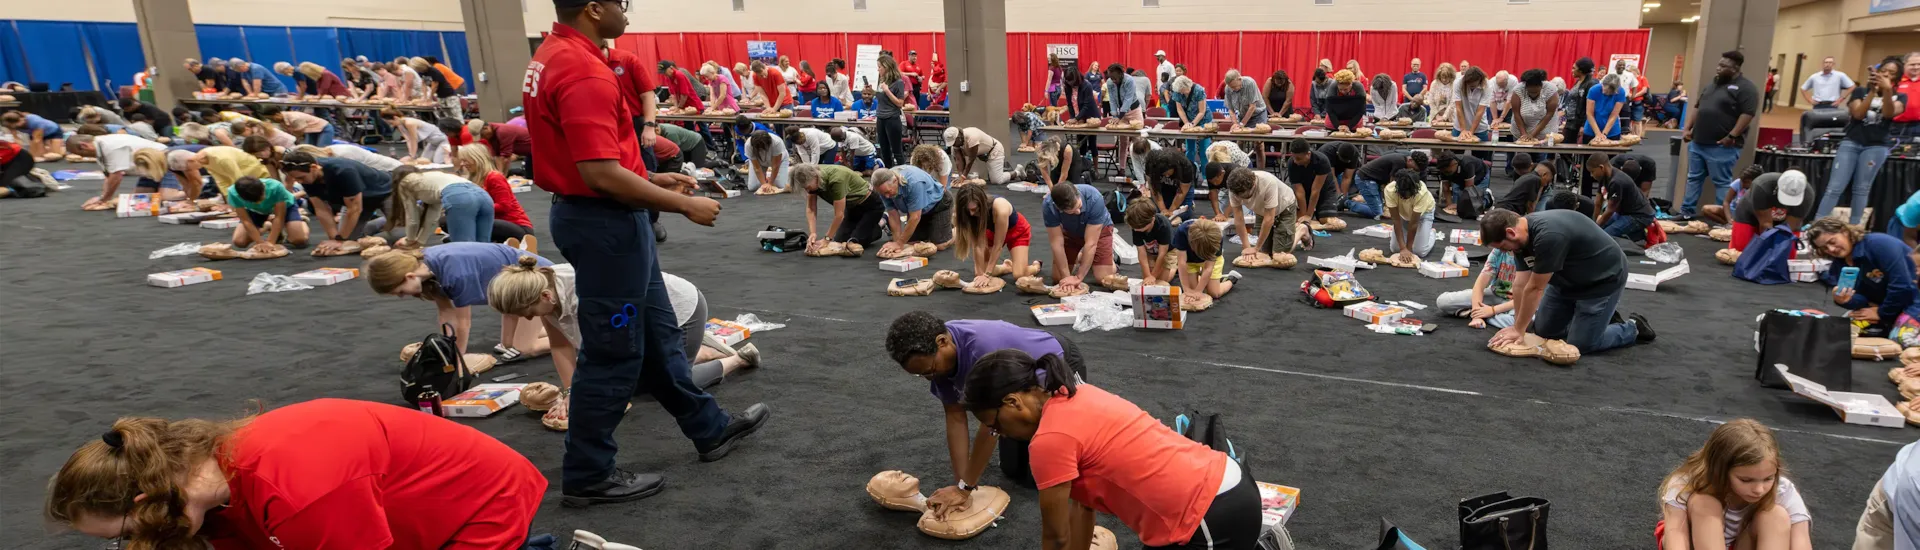 Citizens doing CPR on a dummy